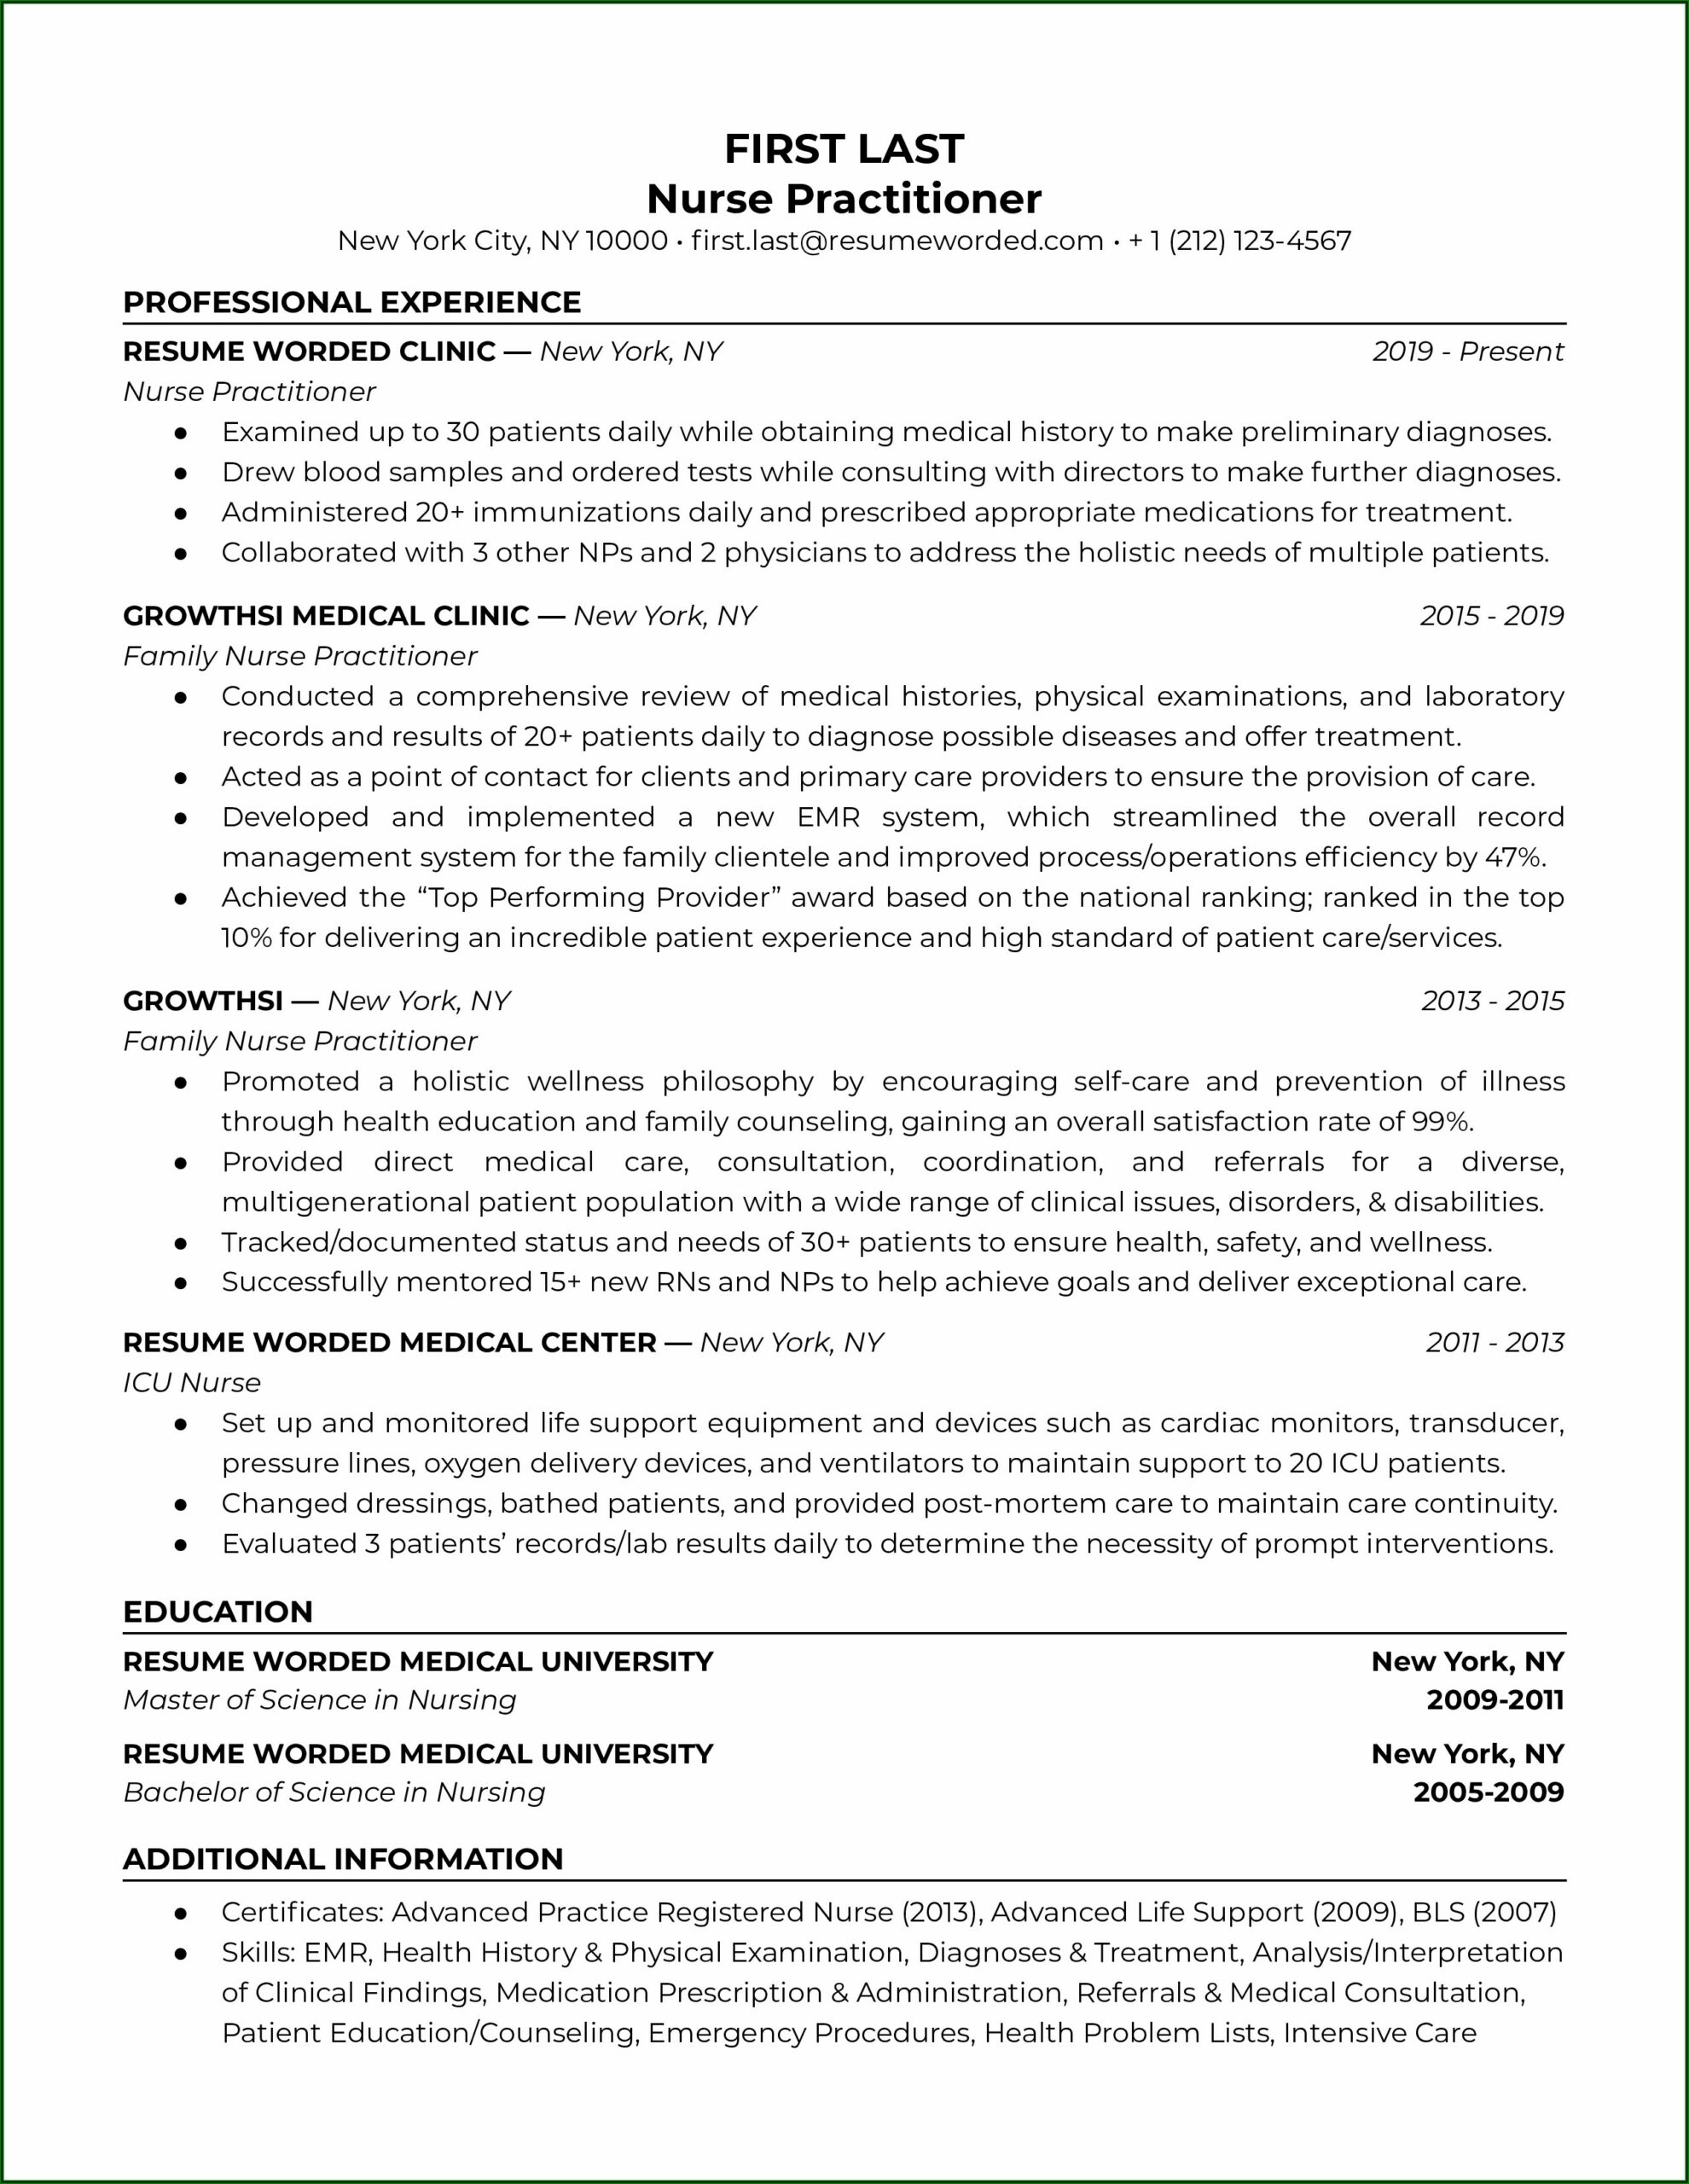 Resume Examples For Nurse Practitioners